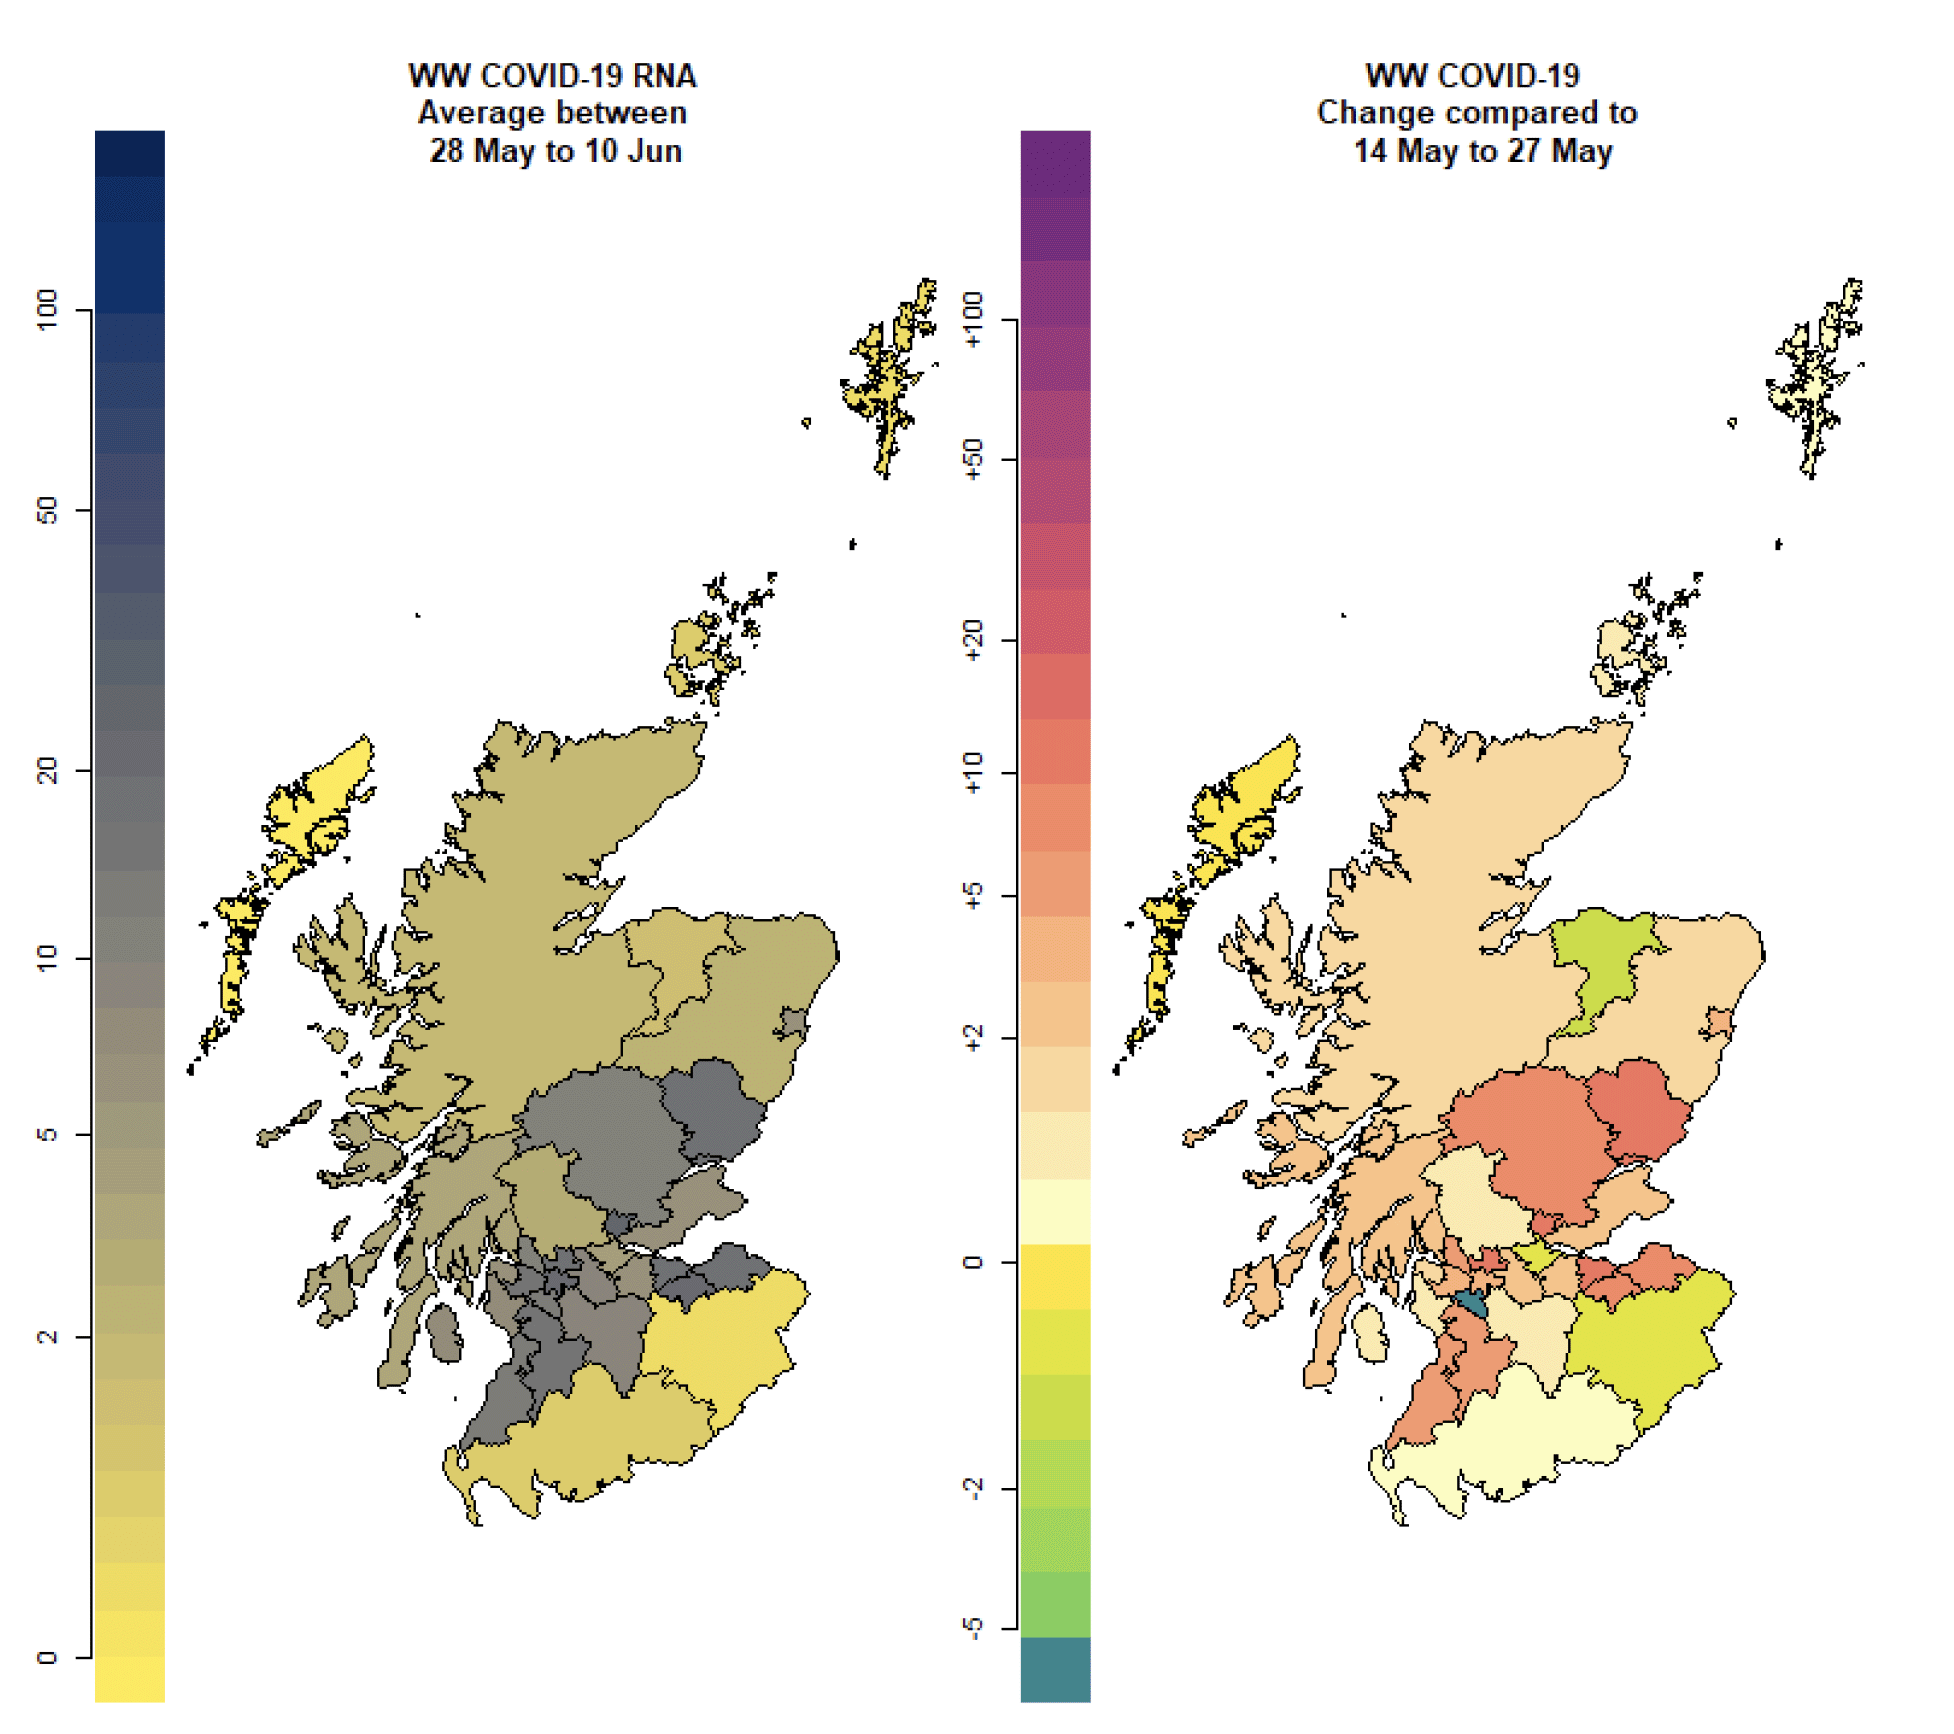 Figure 13. Two maps showing the wastewater Covid-19 levels for each local authority. The first map shows the levels between 28 May and 10 June, and the second shows differences from the previous two weeks.